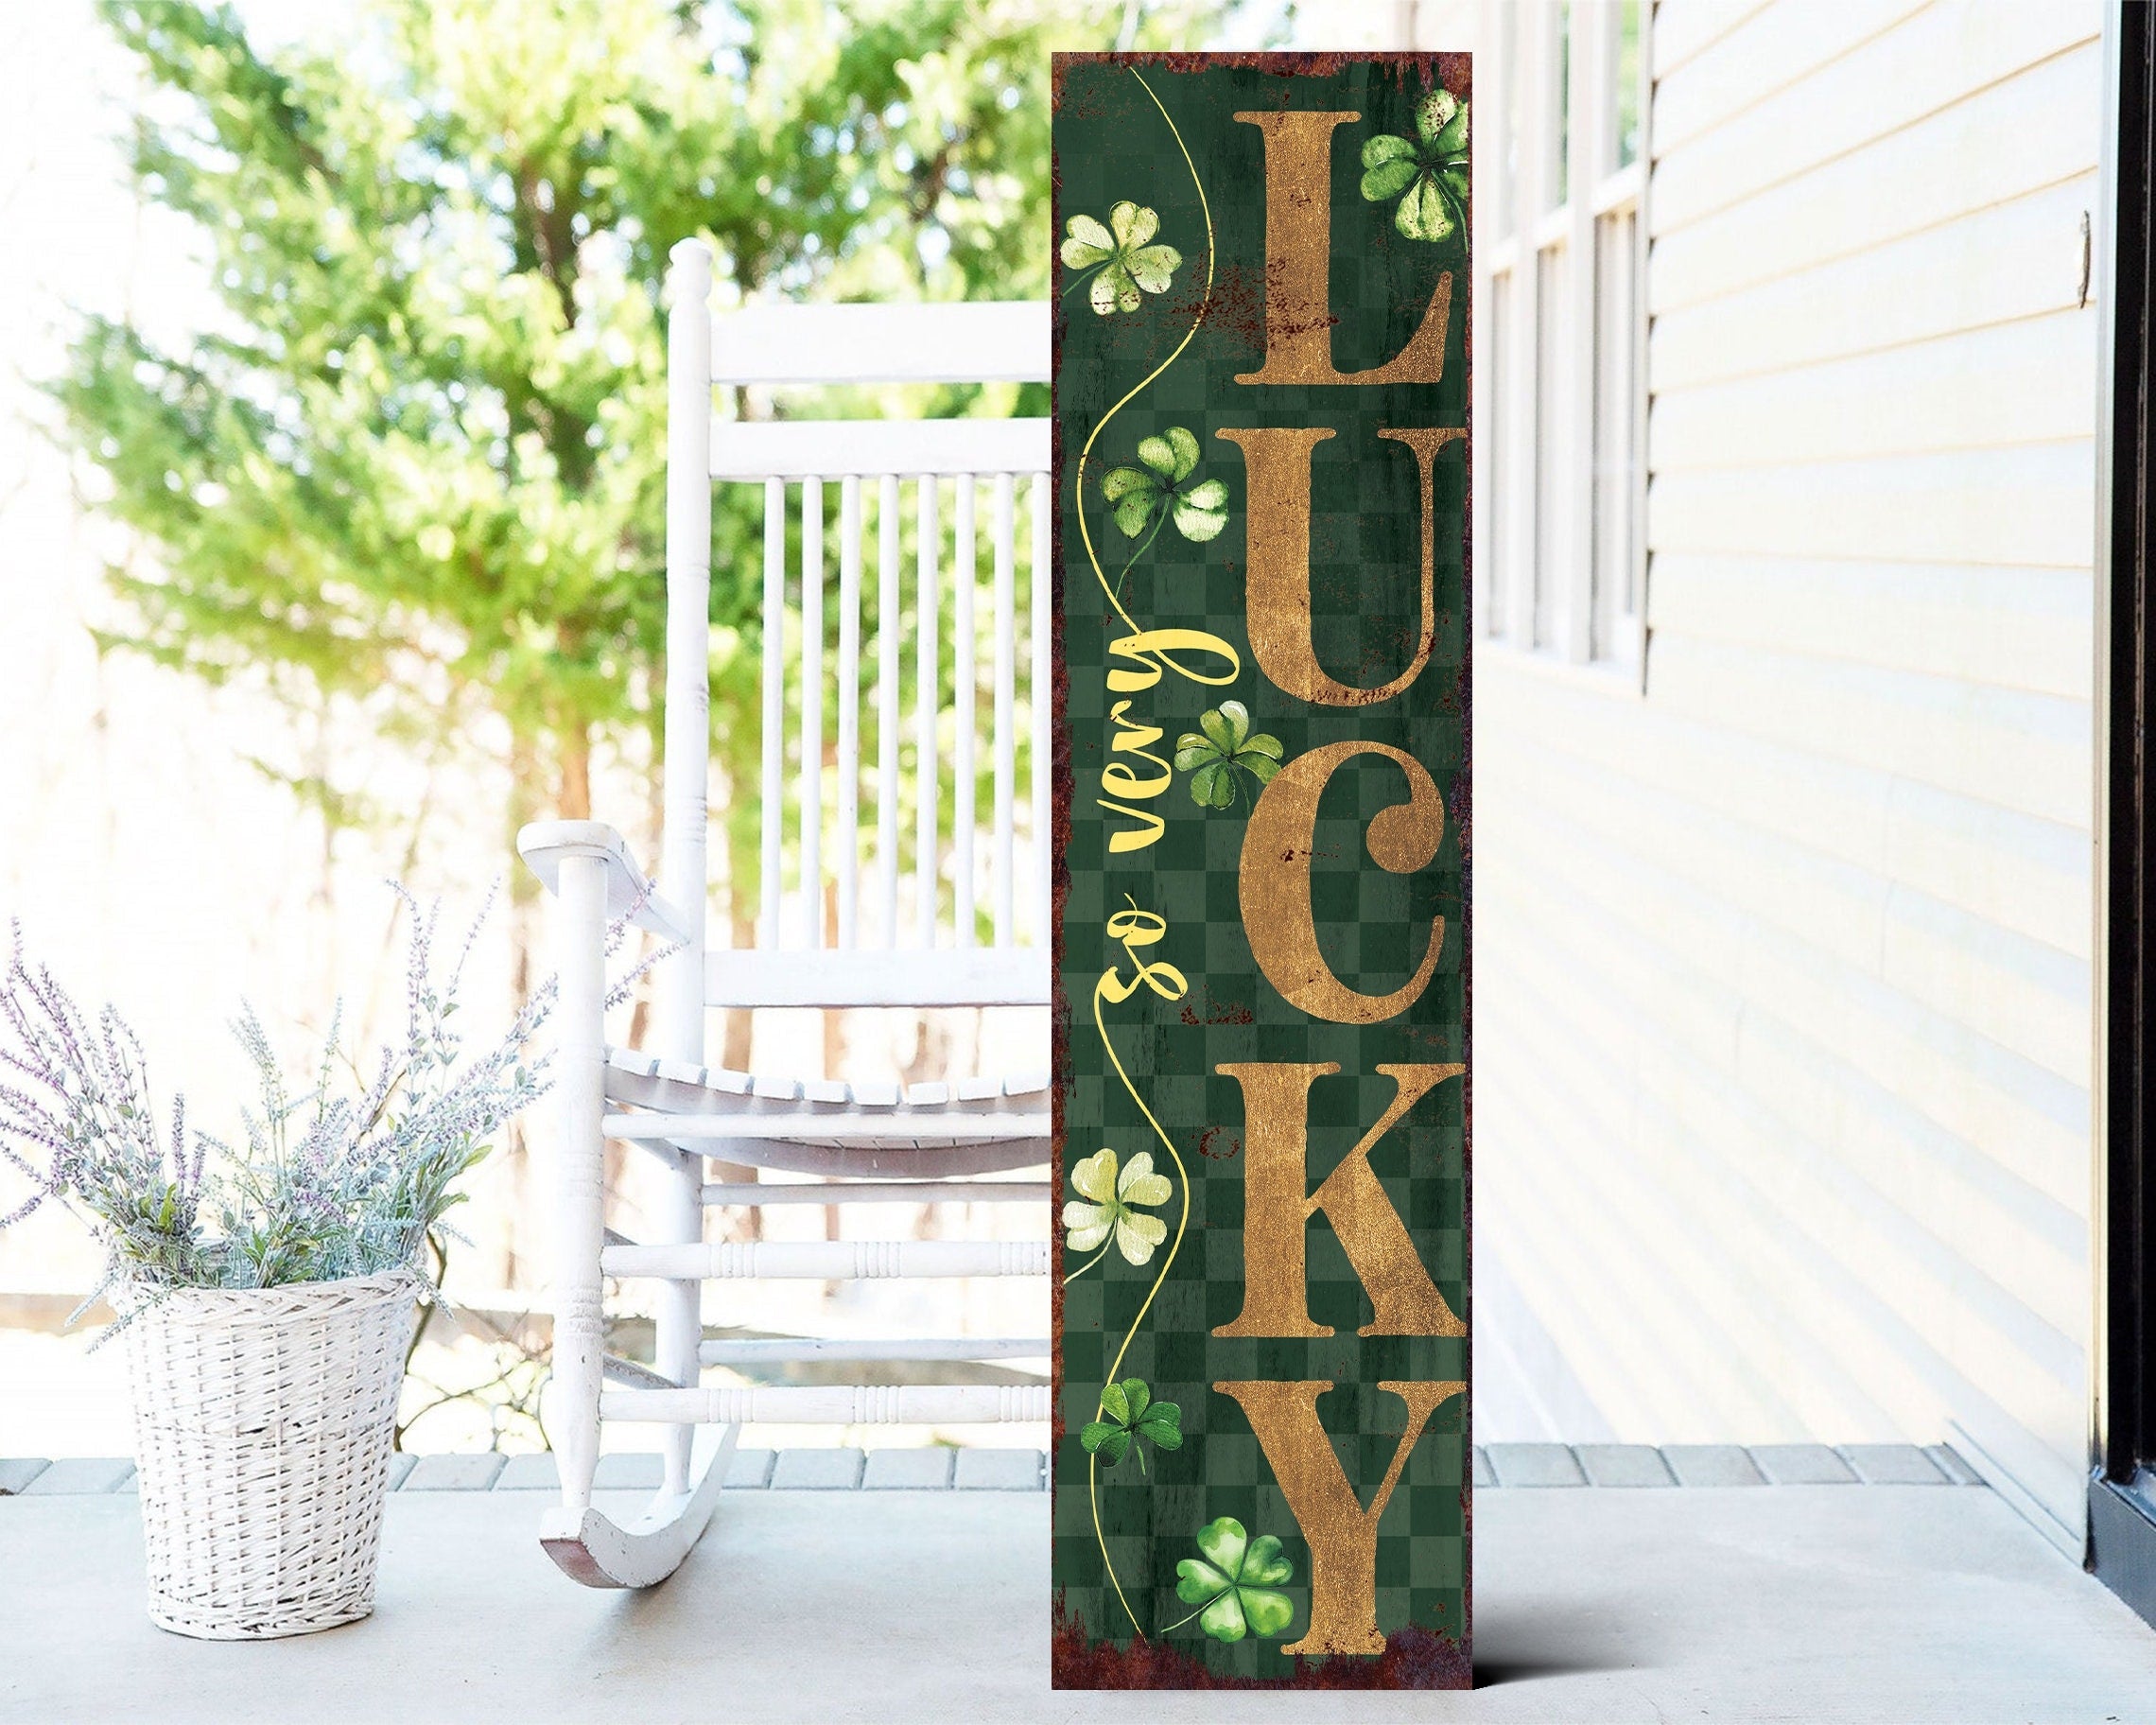 36-Inch-Rustic-Modern-Farmhouse-Entryway-St.Patrick's-Day-'So-Very-Lucky'-Sign-for-Front-Porch,-St.Patrick's-Outdoor-Decor-for-Front-Door-